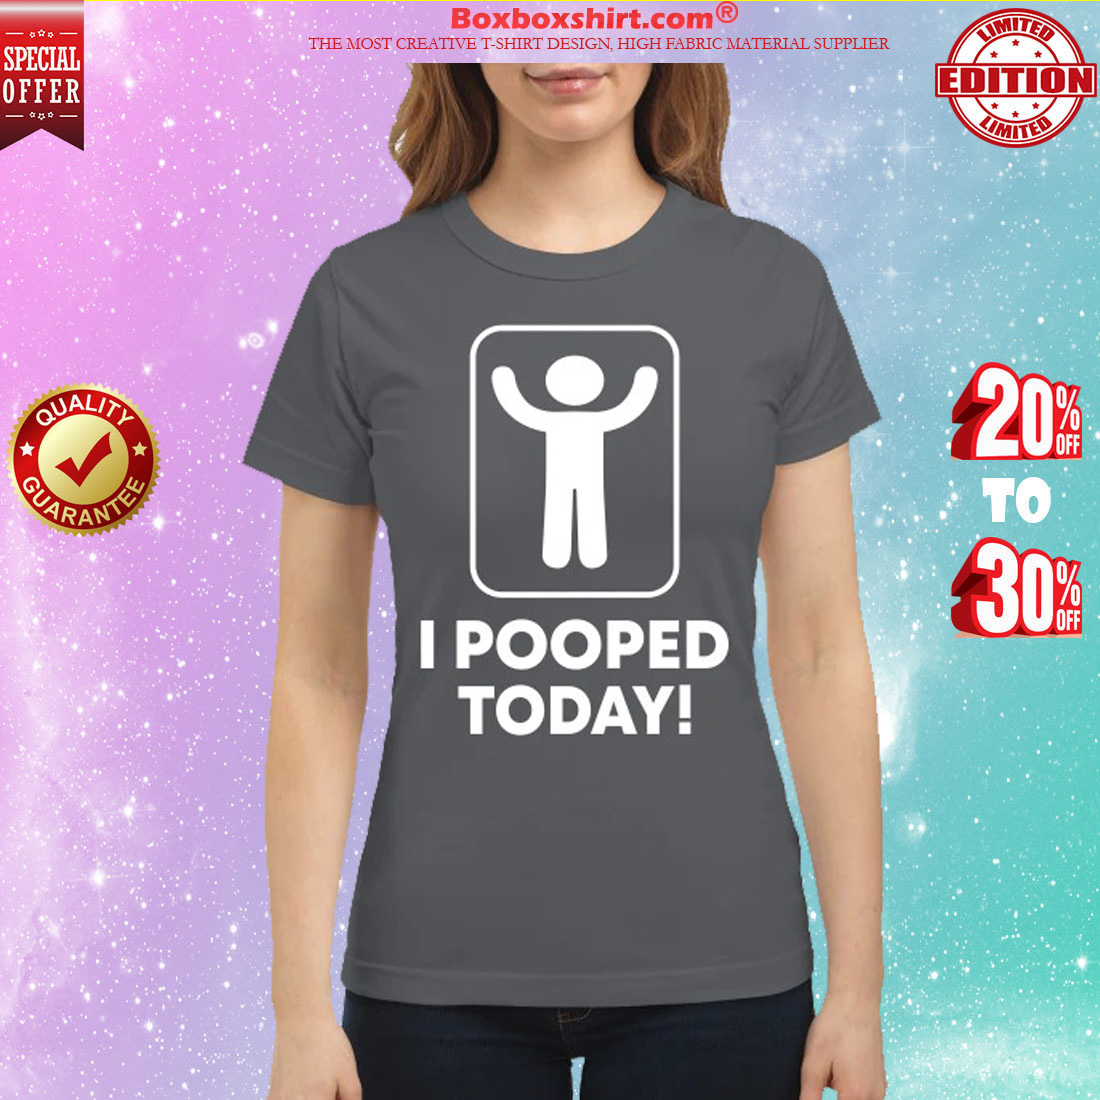 I pooped today classic shirt